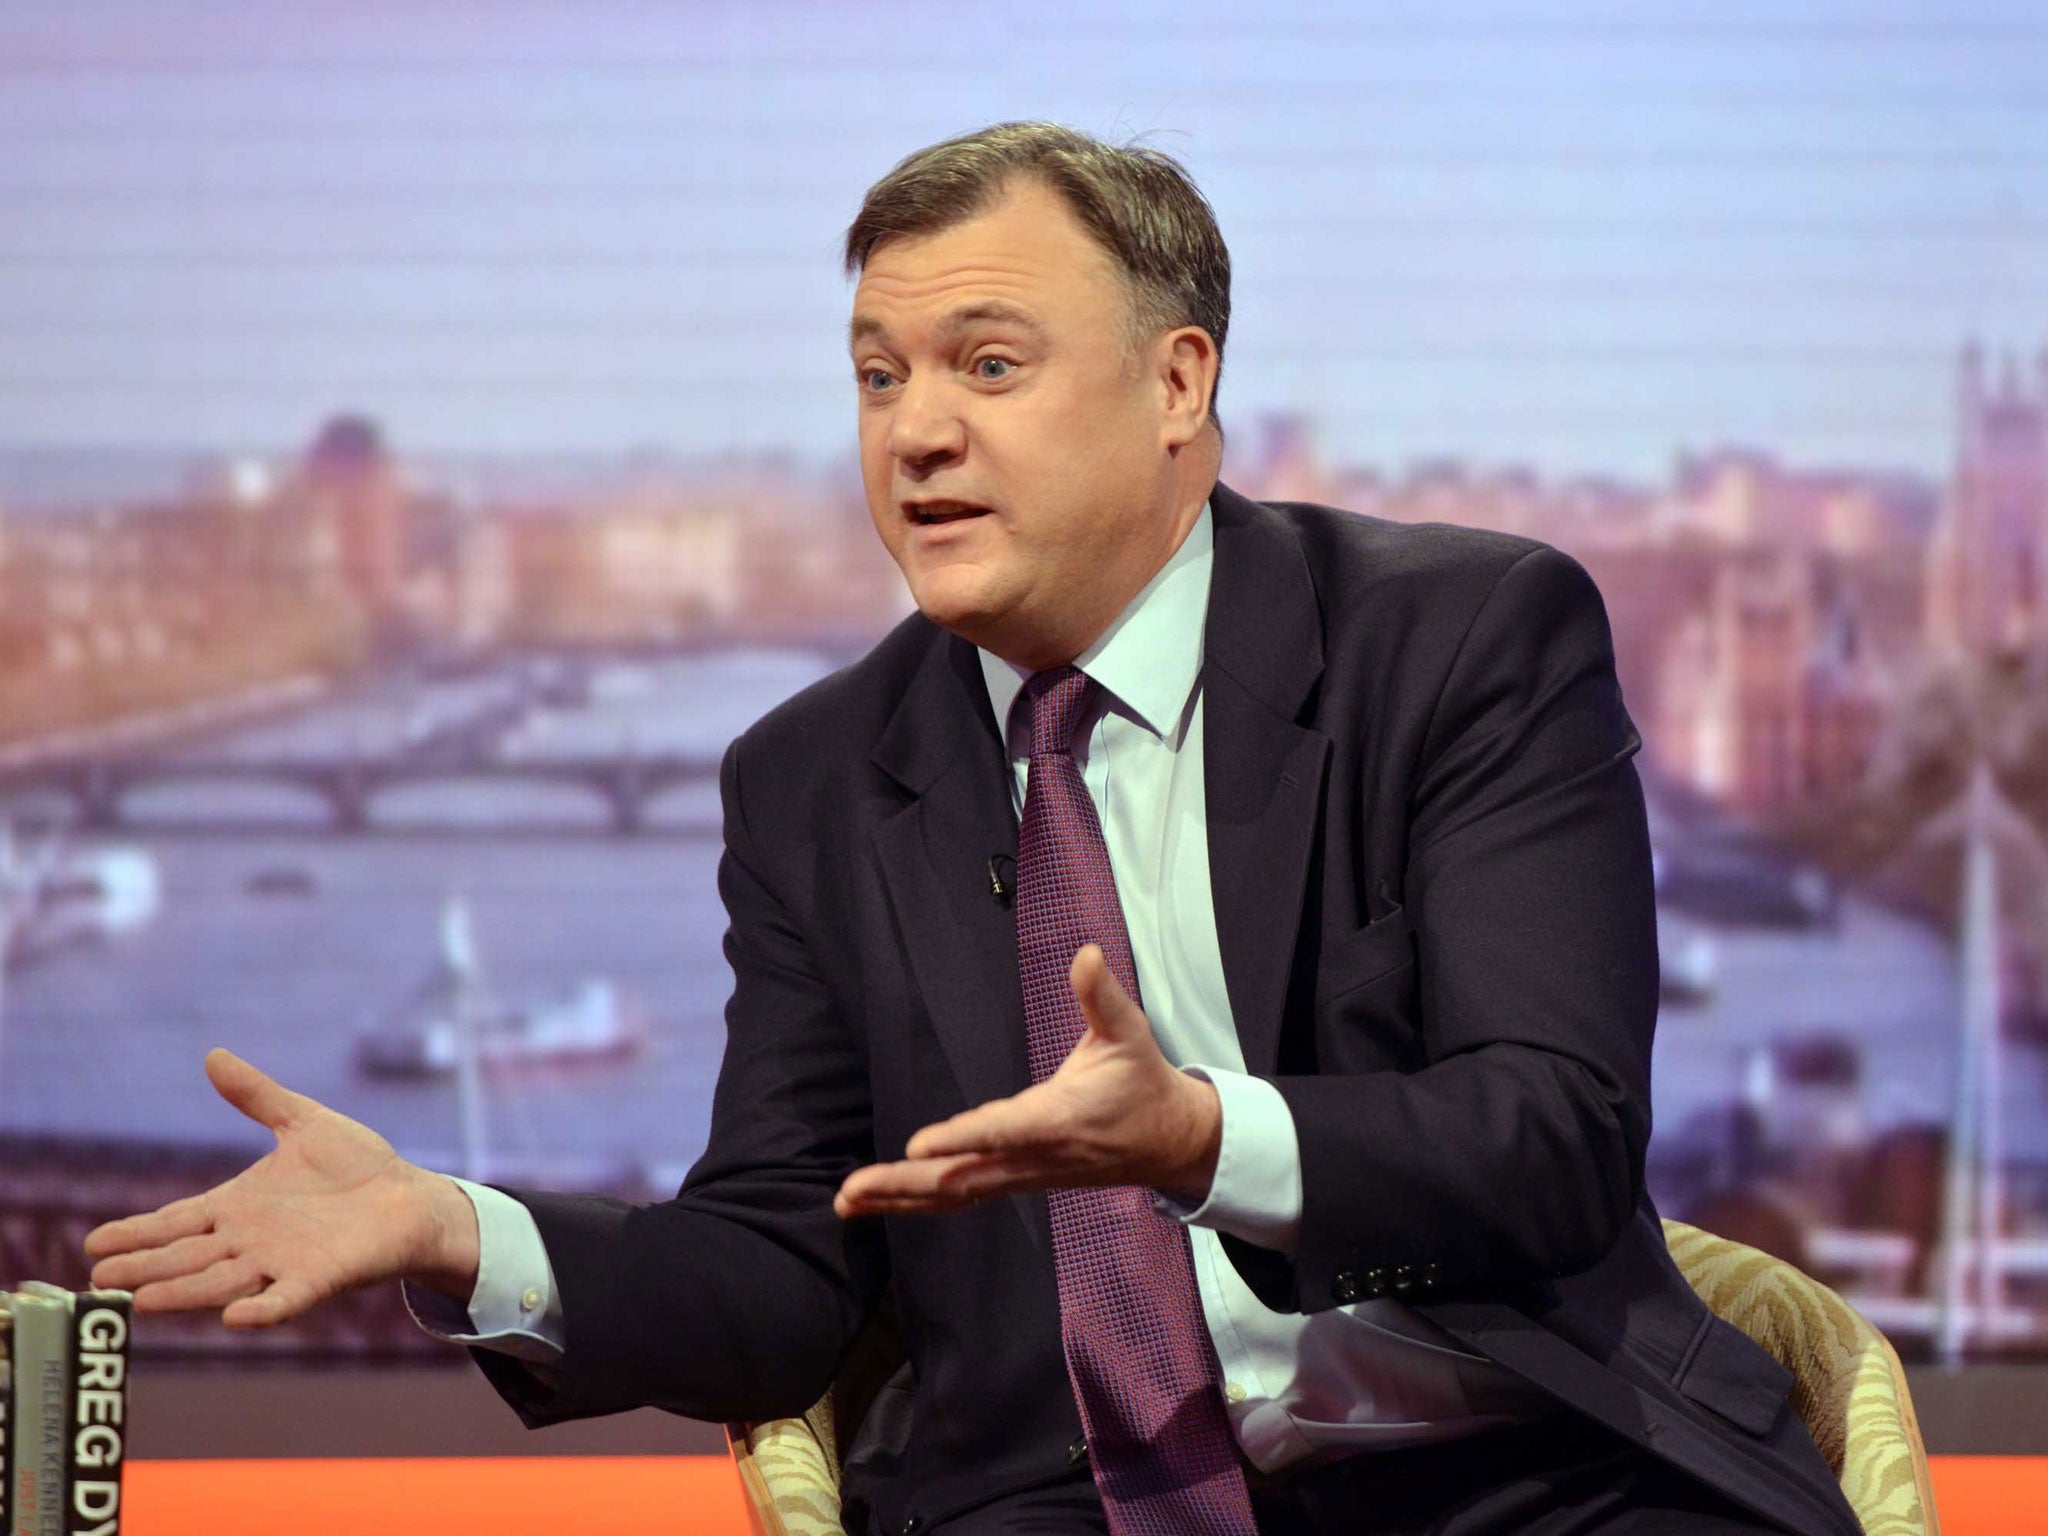 Ed Balls denied the claim that he would go beyond a 50p top tax rate